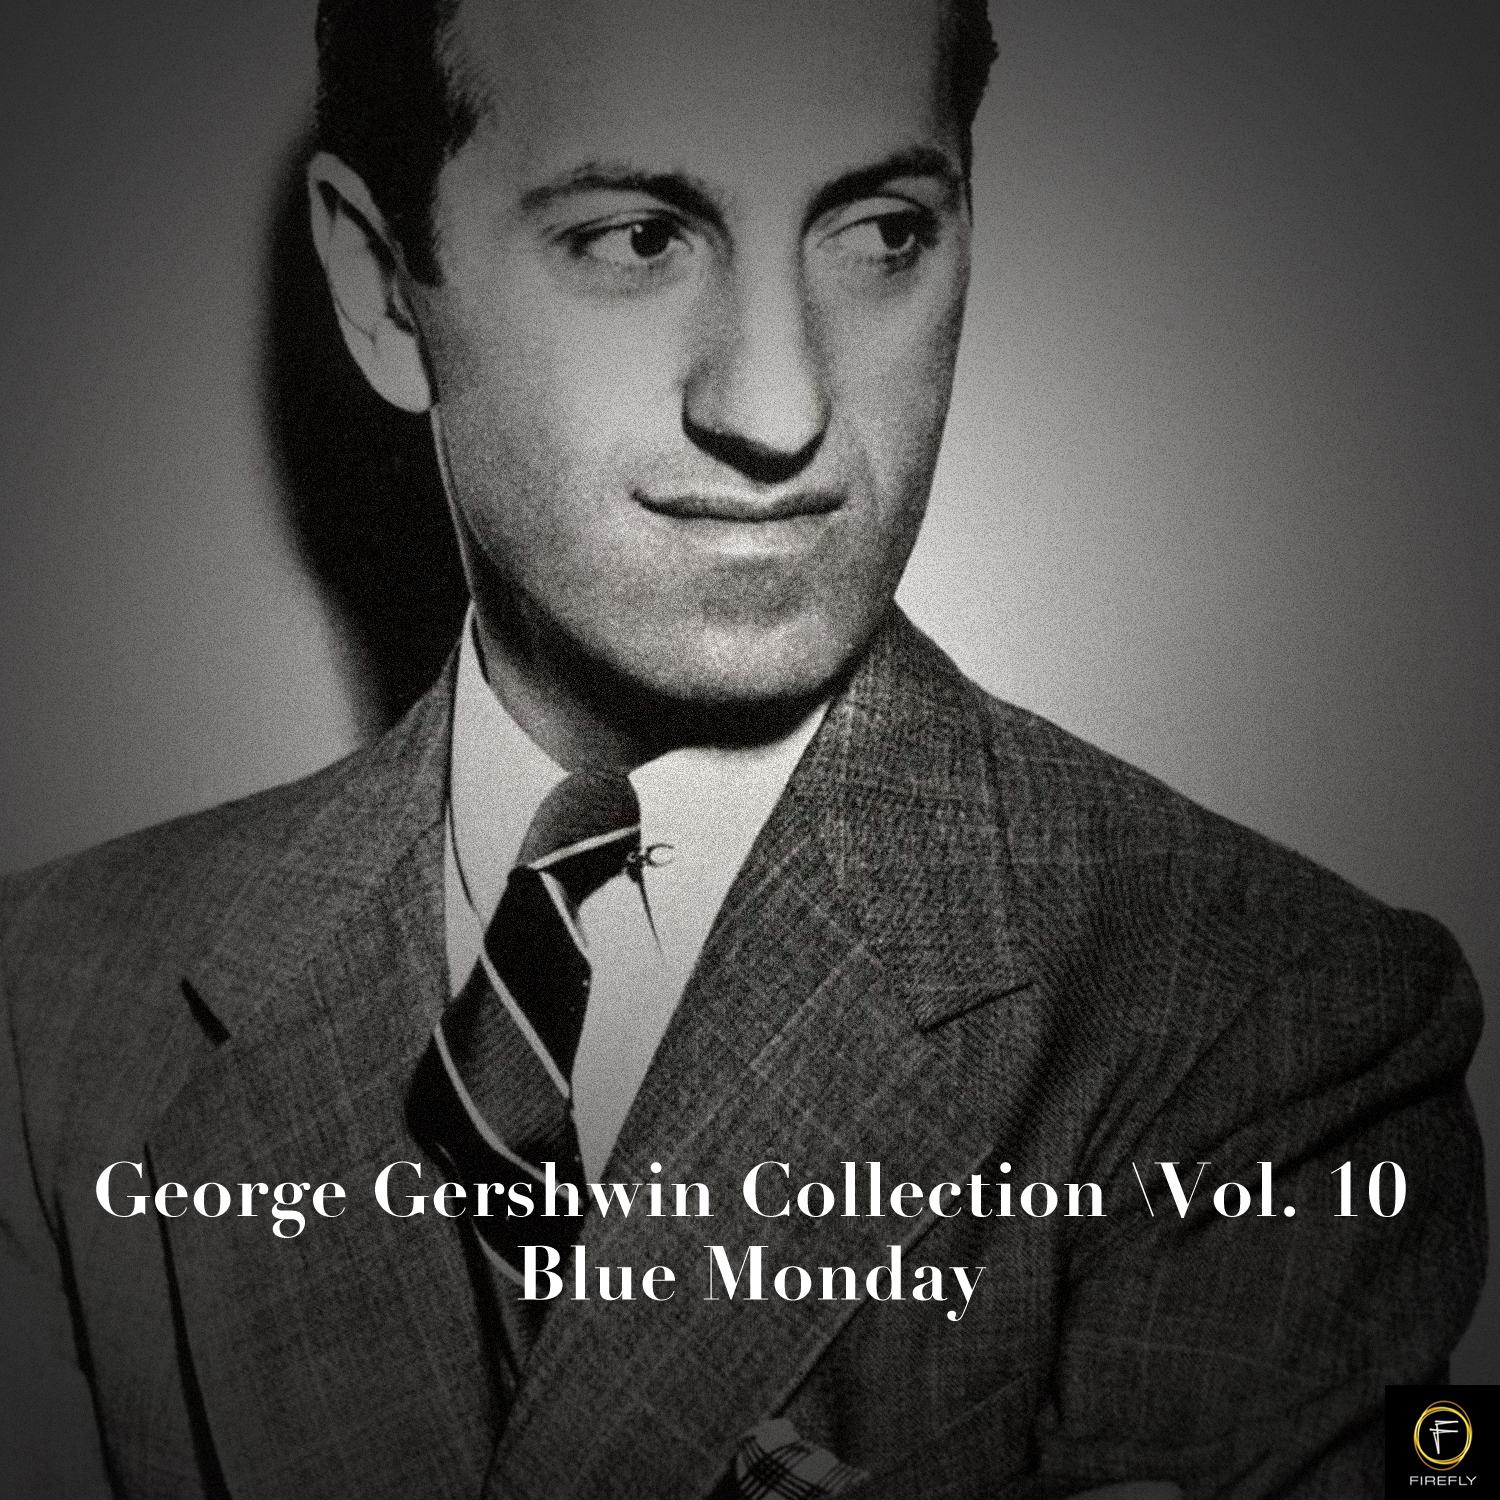 George Gershwin Collection, Vol. 10: Blue Monday